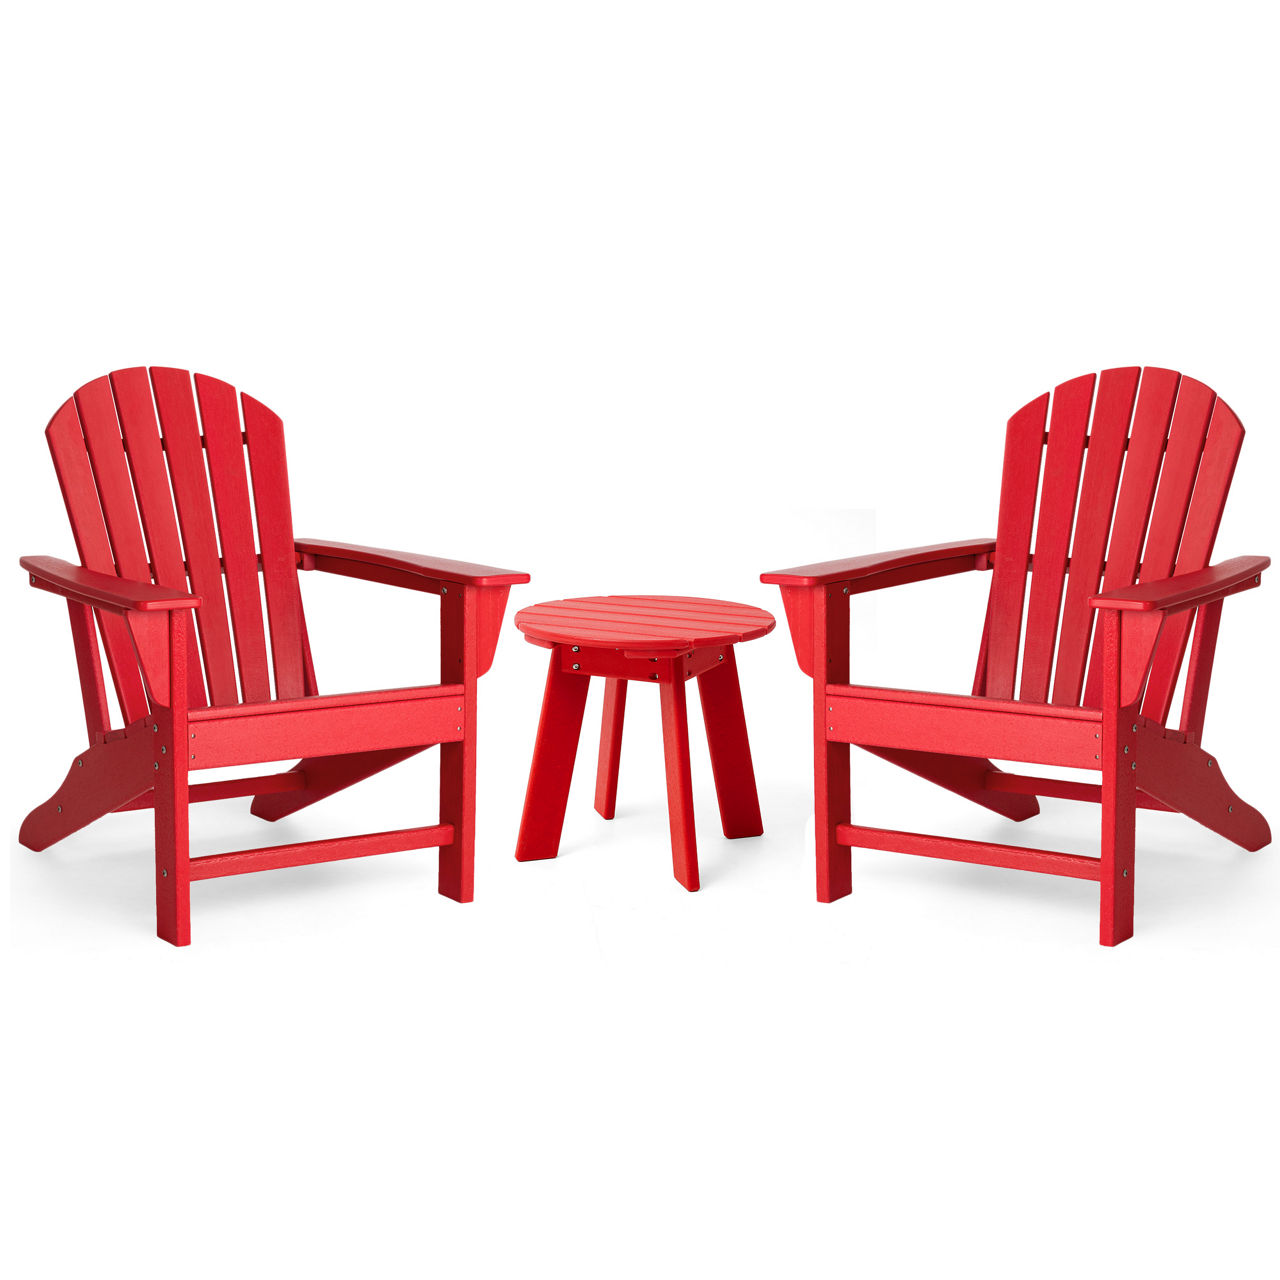 3-Piece Outdoor Patio Red HDPE Adirondack Chair and Side Table Set1pc 20"D Side Table2pcs Adirondack Chairs (KD)